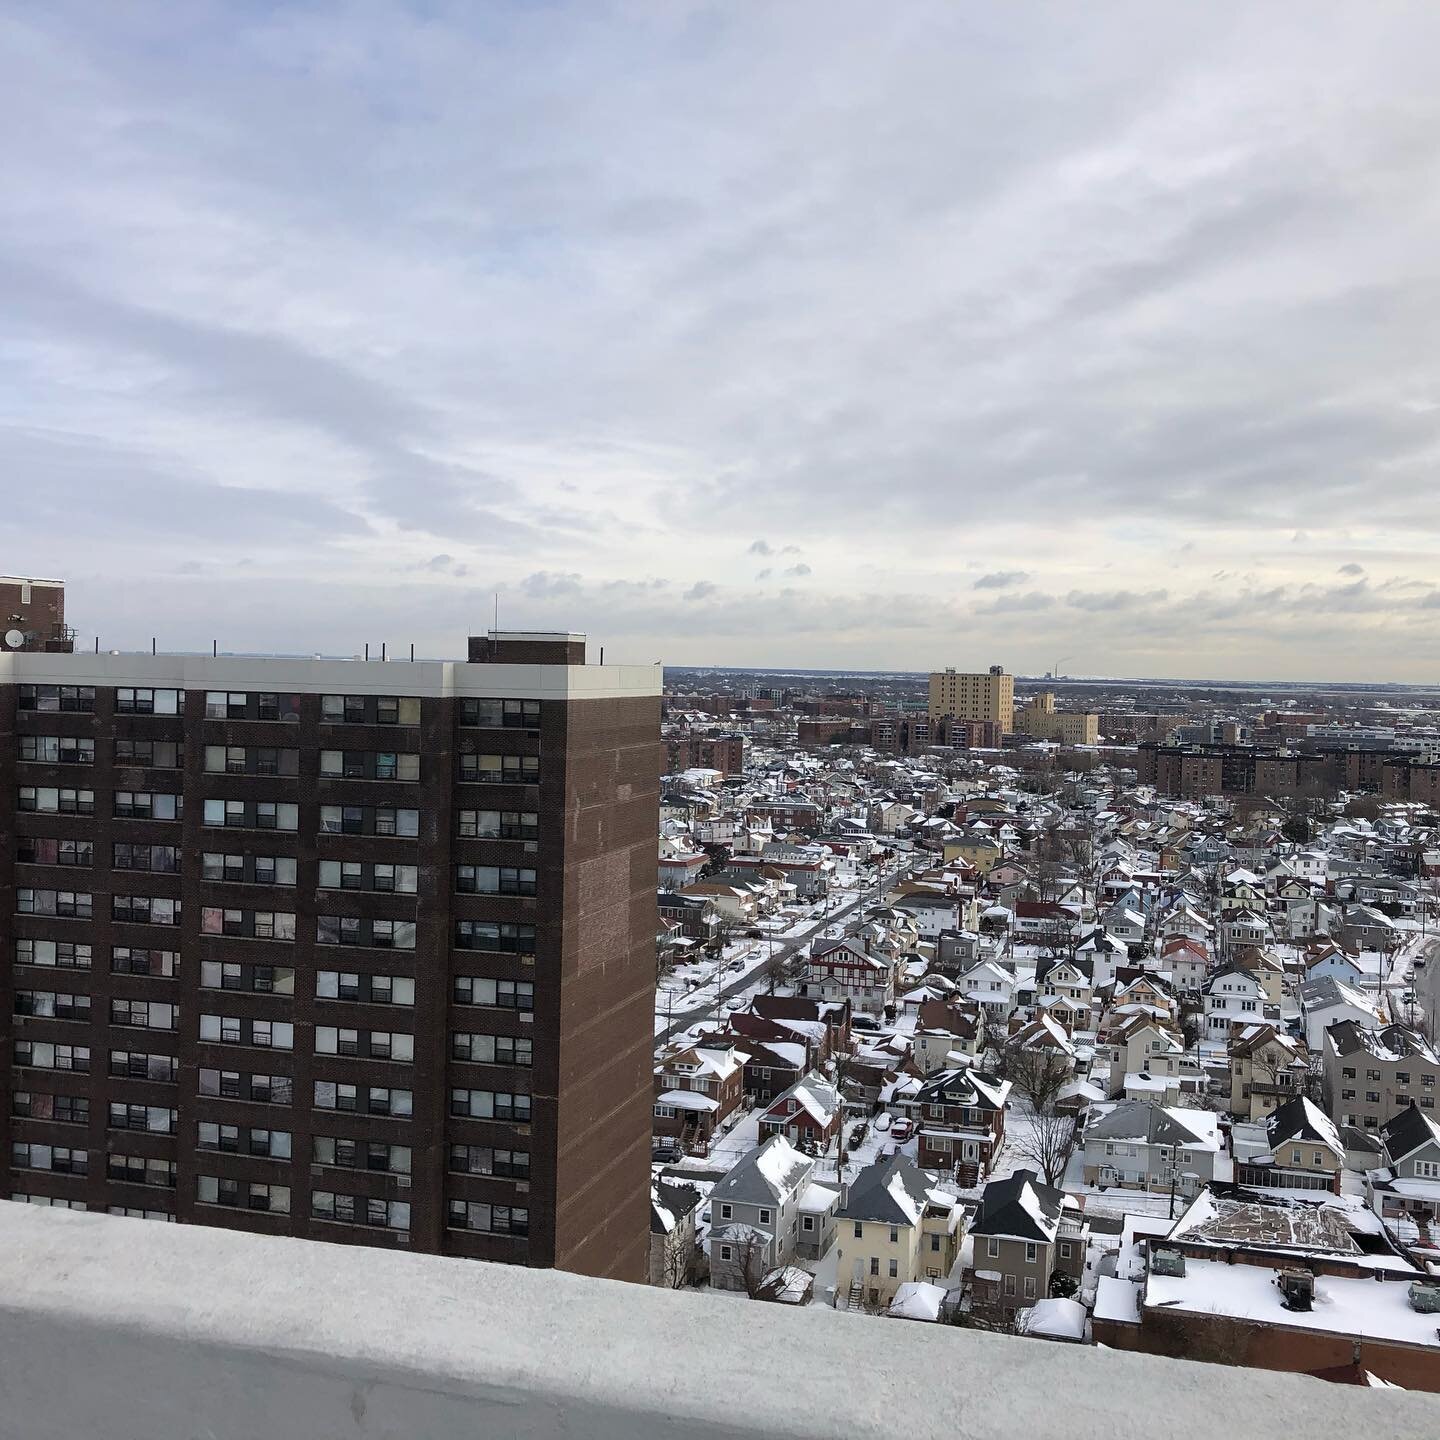 Winter wonderland at our roof replacement job for 20 story building. #BAprojects #newyork #longisland #roof #rooftop #architect #construction #views #winter #snow #florida #floridalife